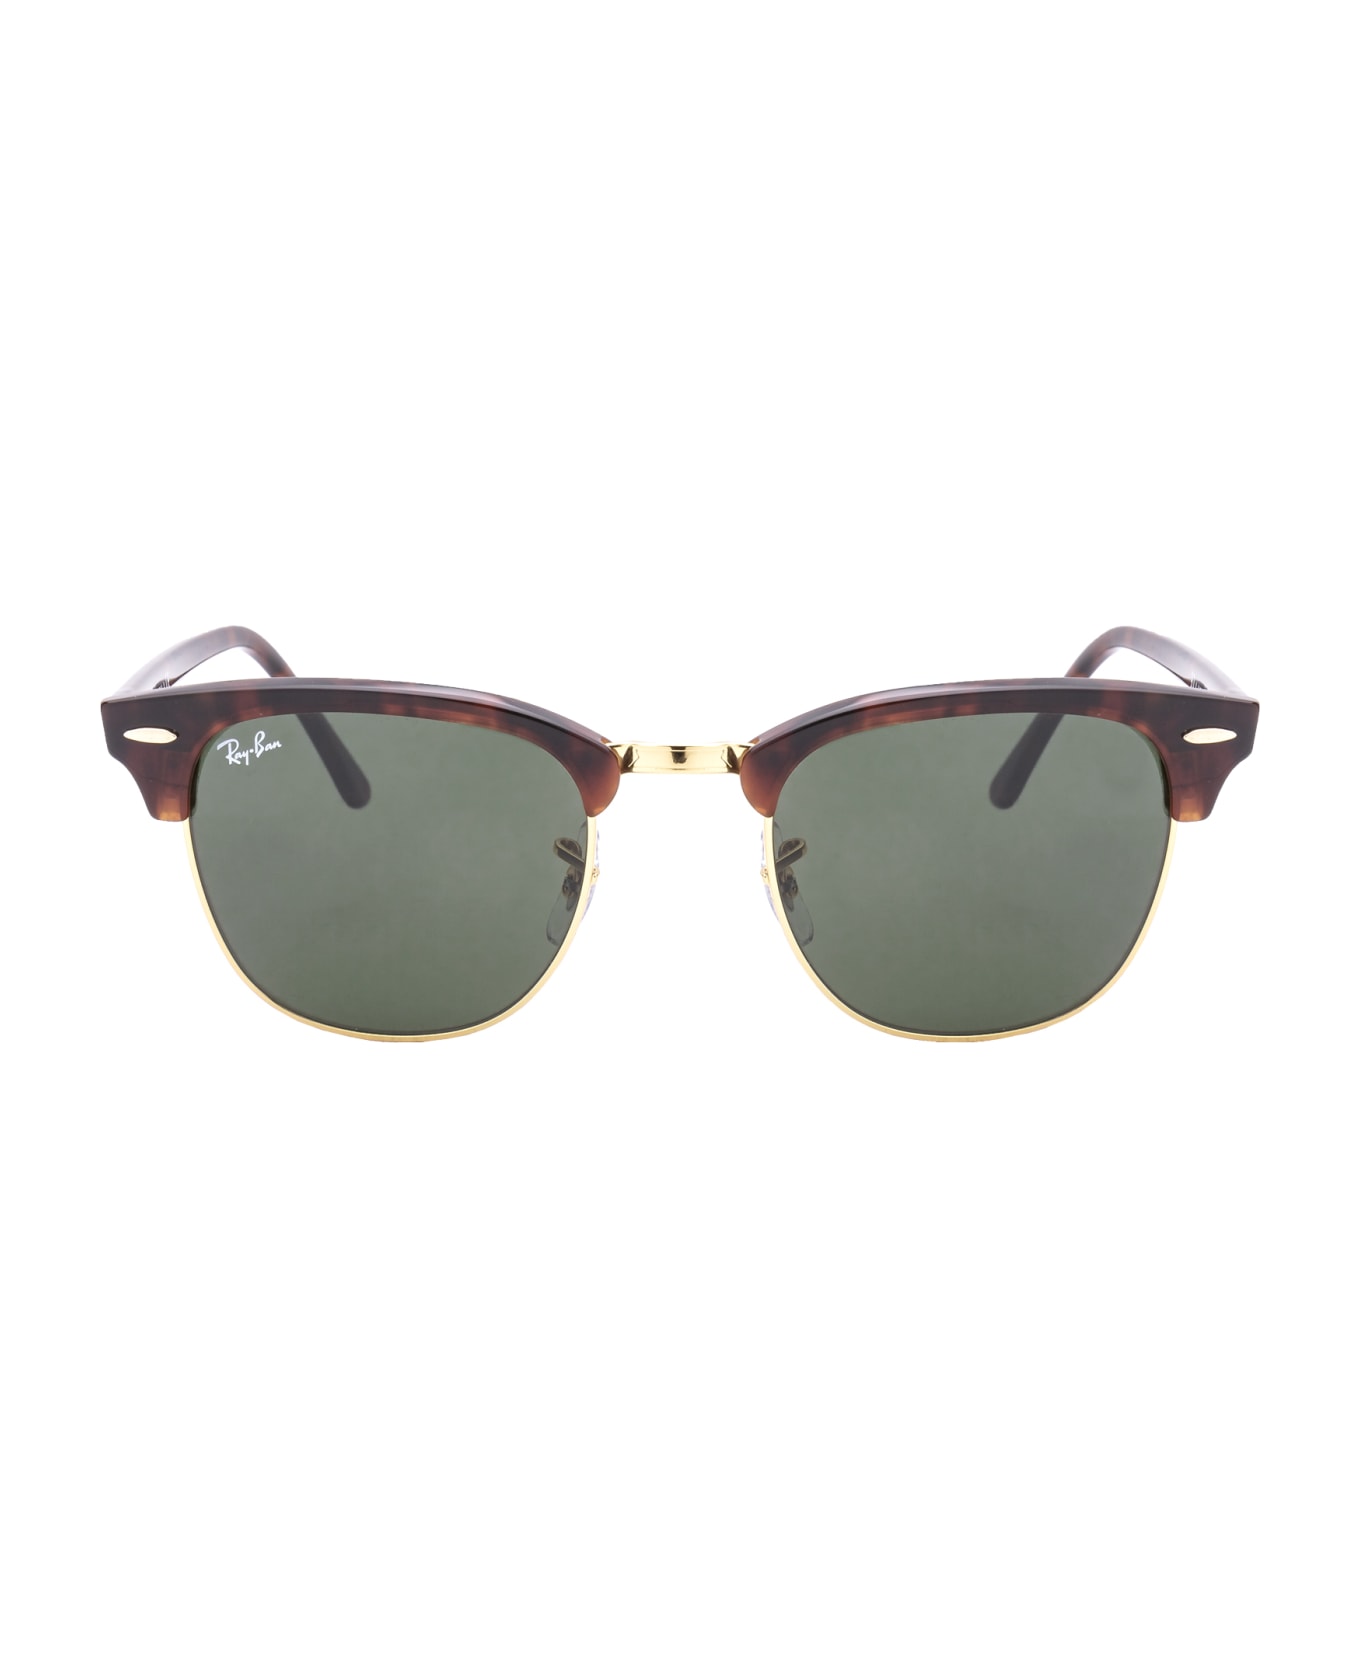 Ray-Ban Clubmaster Sunglasses - W0366 Tortoise On Gold